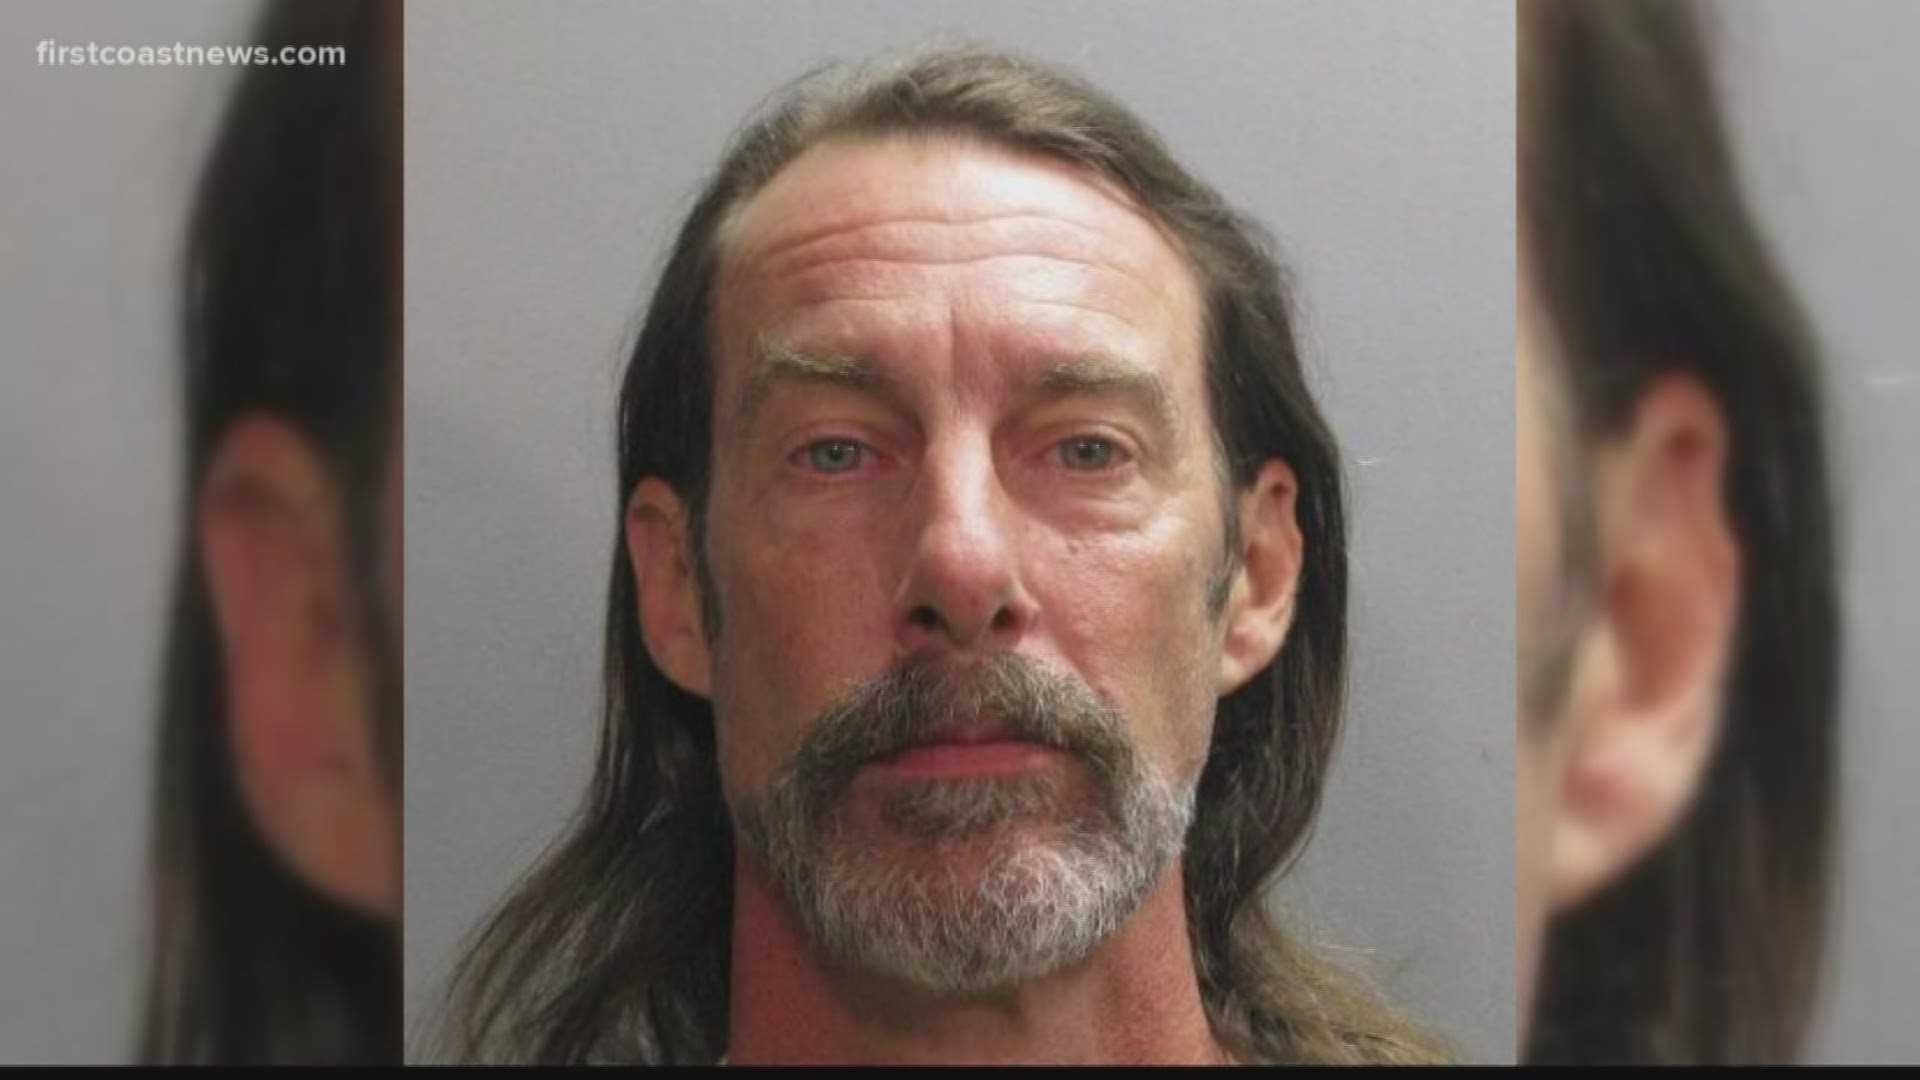 Police arrested 51-year-old Ethan Obrien Todd last week before Thanksgiving. A parent of an alleged victim said he was a neighbor they trusted.